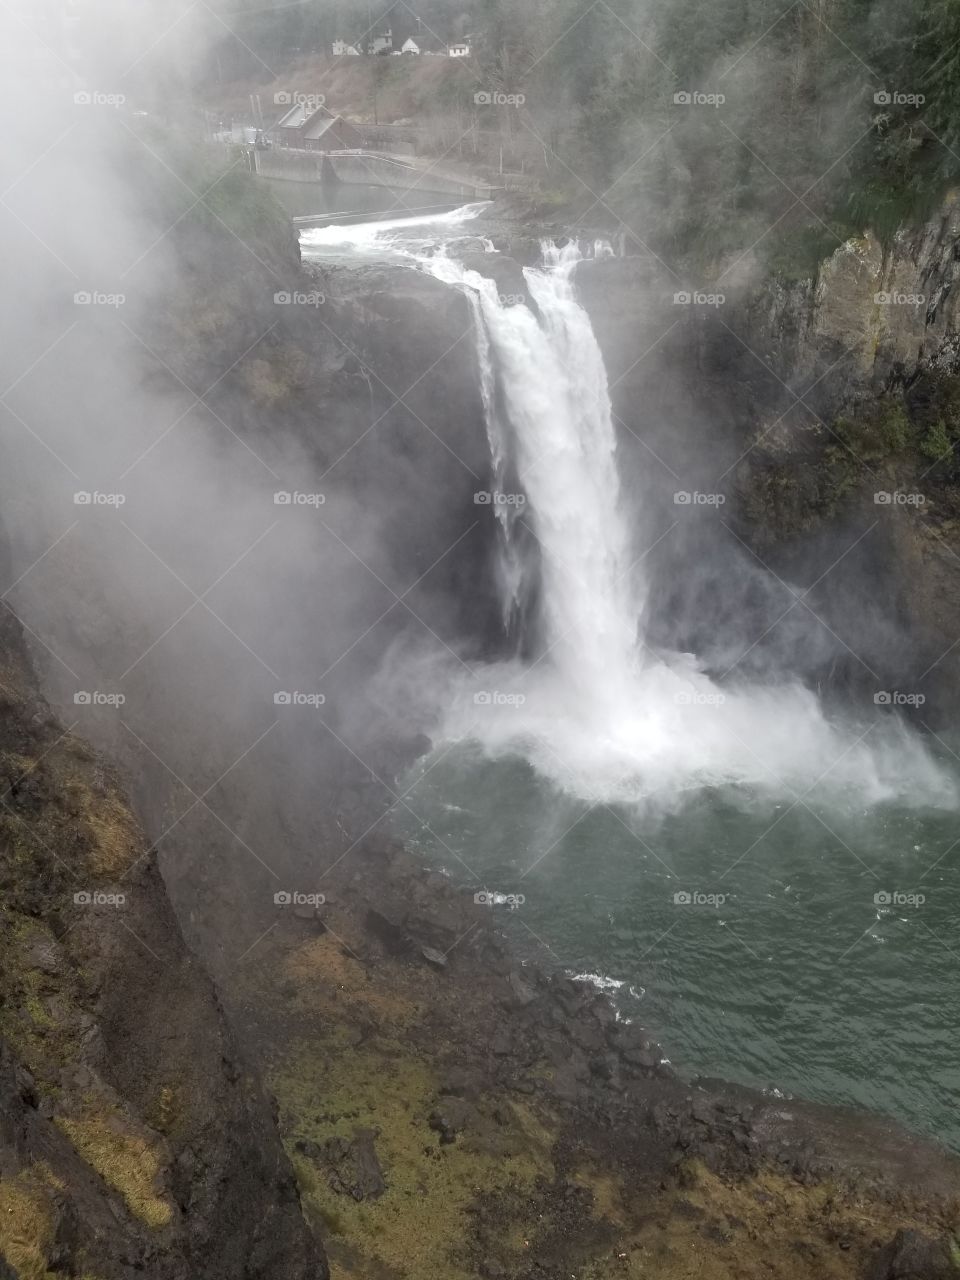 This is a picturesque view of the beautiful Snoqualmie Falls with mist rising up from the floor of the waterfall.